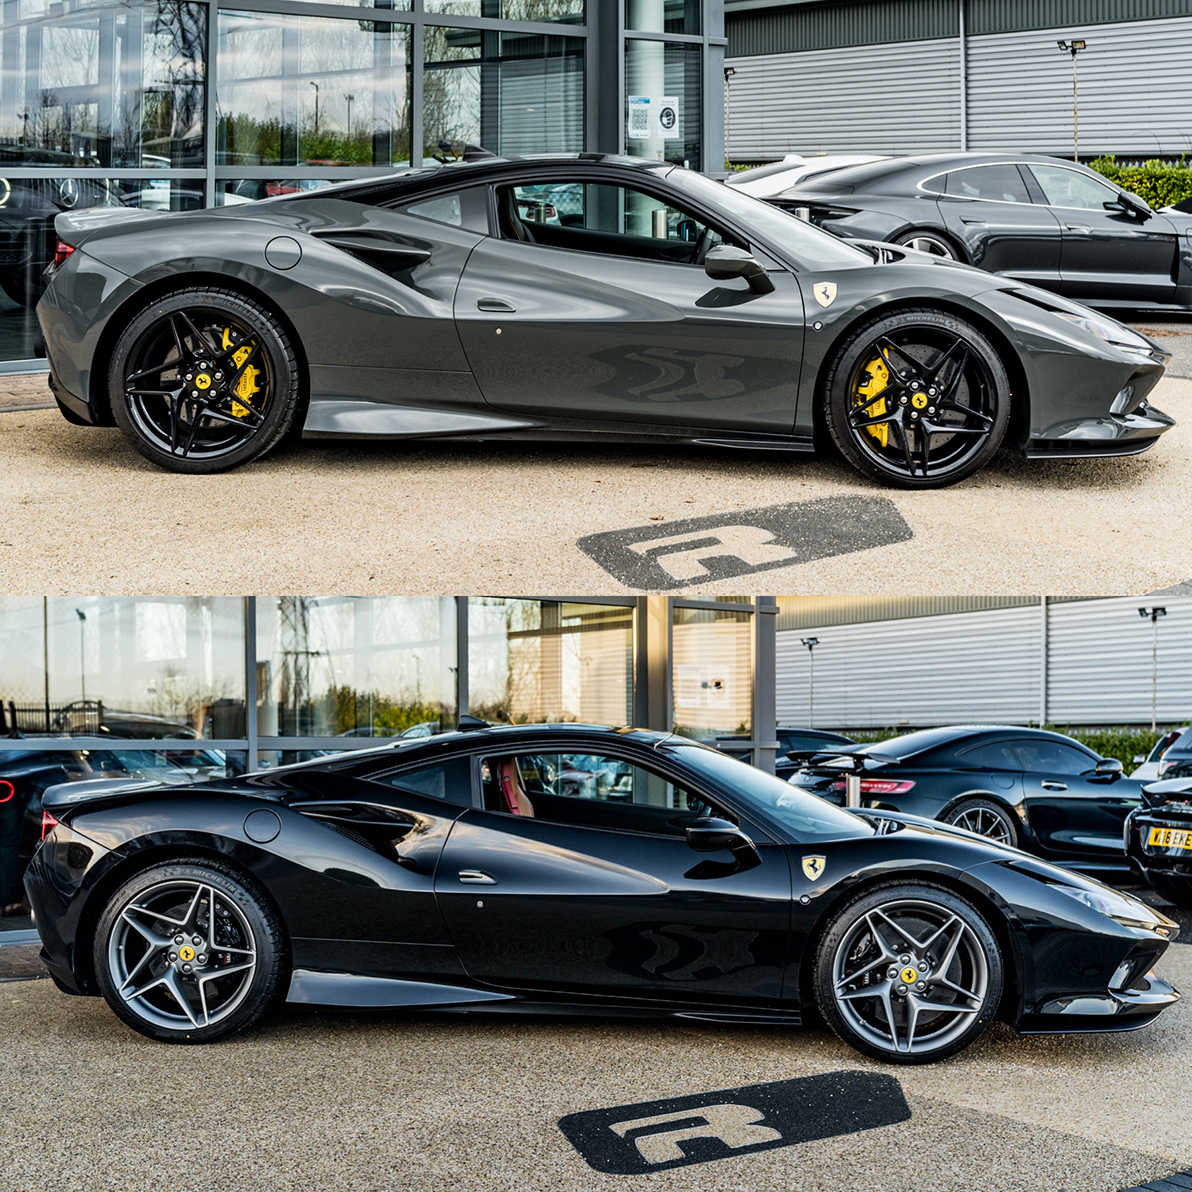 Redline Cars On Twitter With Two Ferrari F8 Tributo S In Stock Which Spec Would You Take Grey Or Black